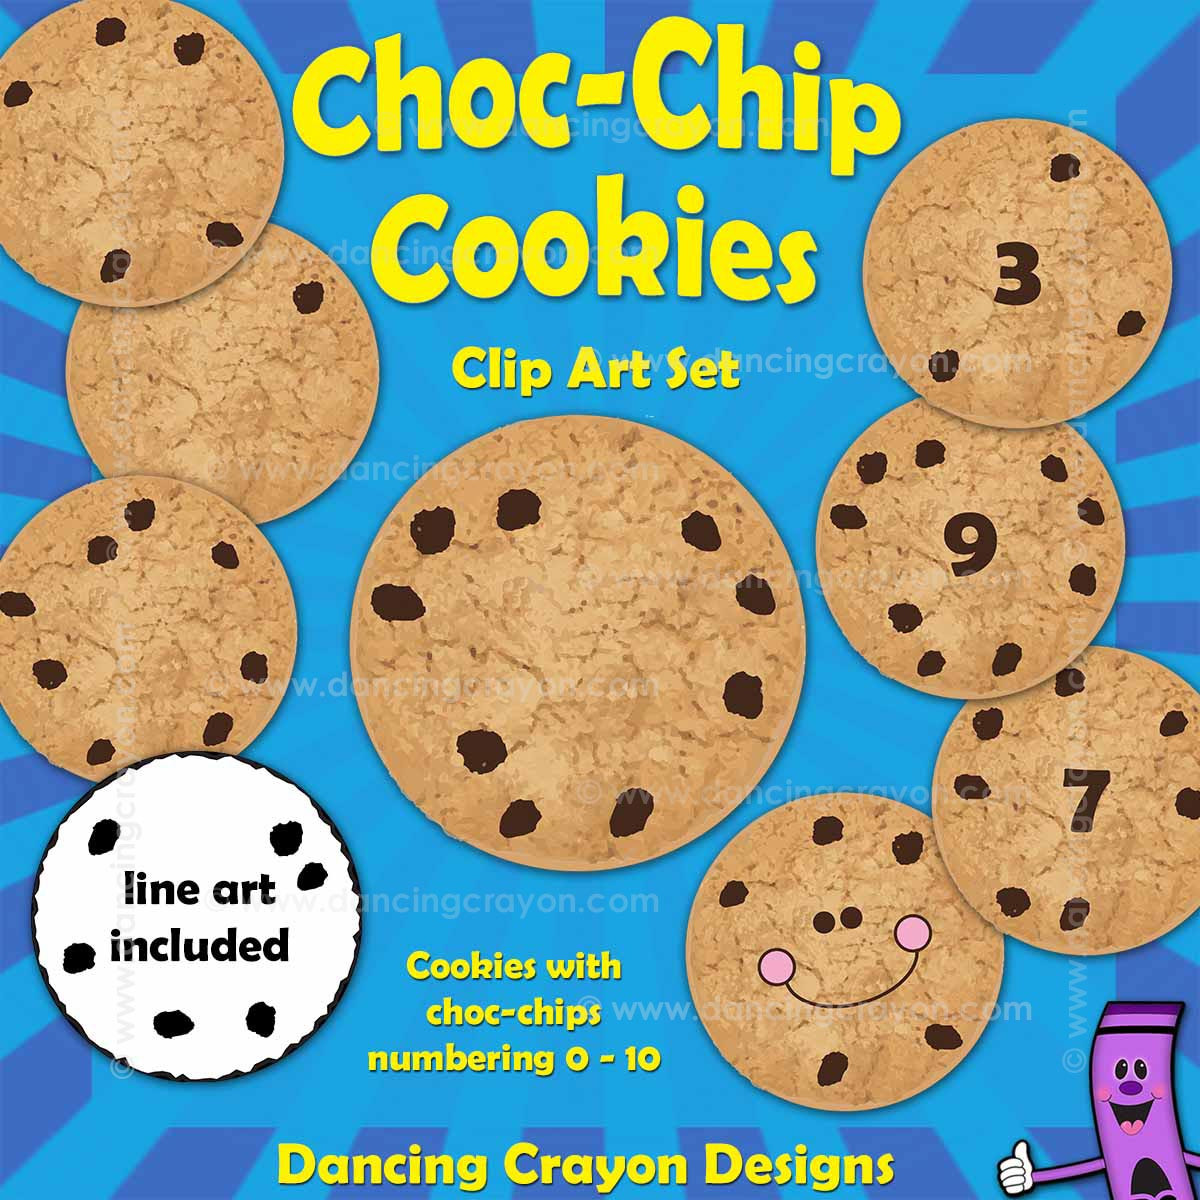 Featured cookies. Chocolate Chip cookies Farbe Education. Counting cookies. Chocolate Chip Colour. Featured cookie